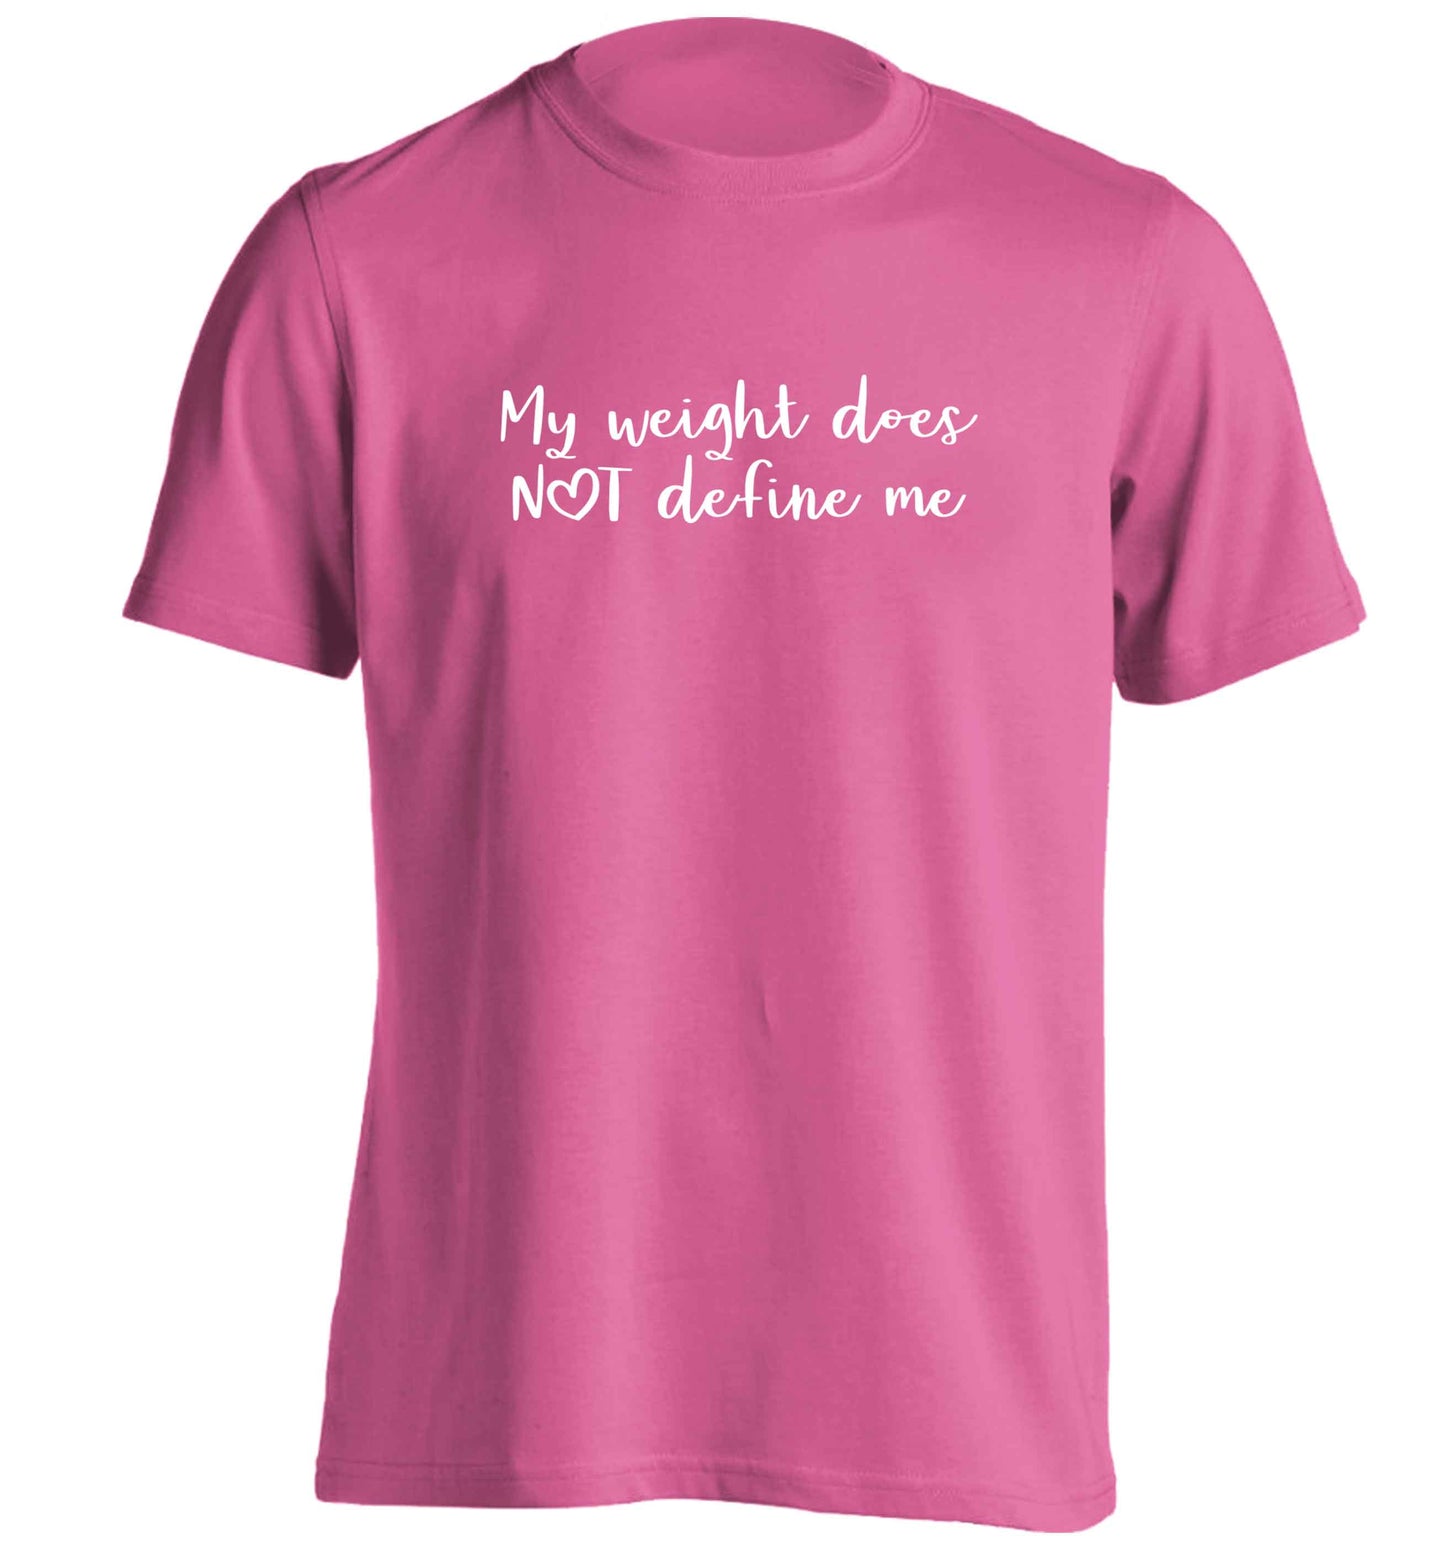 My weight does not define me adults unisex pink Tshirt 2XL